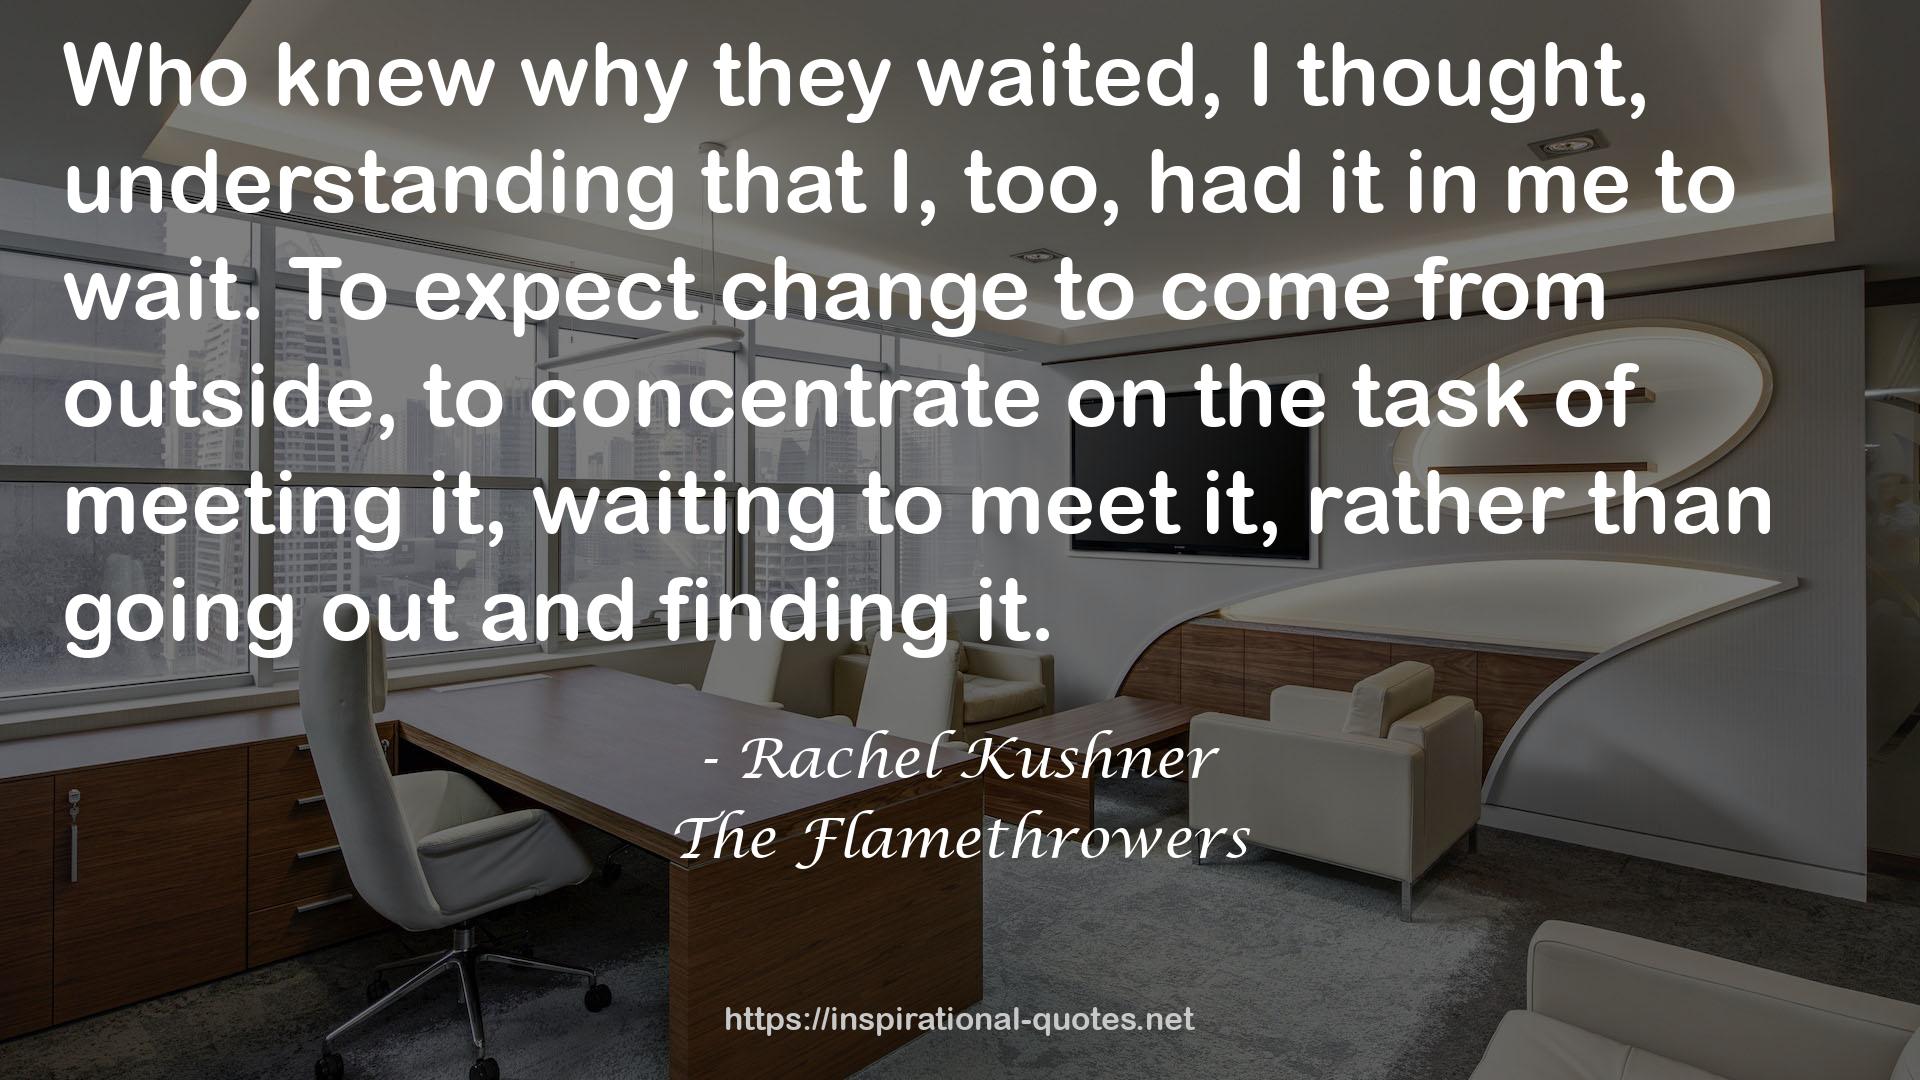 The Flamethrowers QUOTES